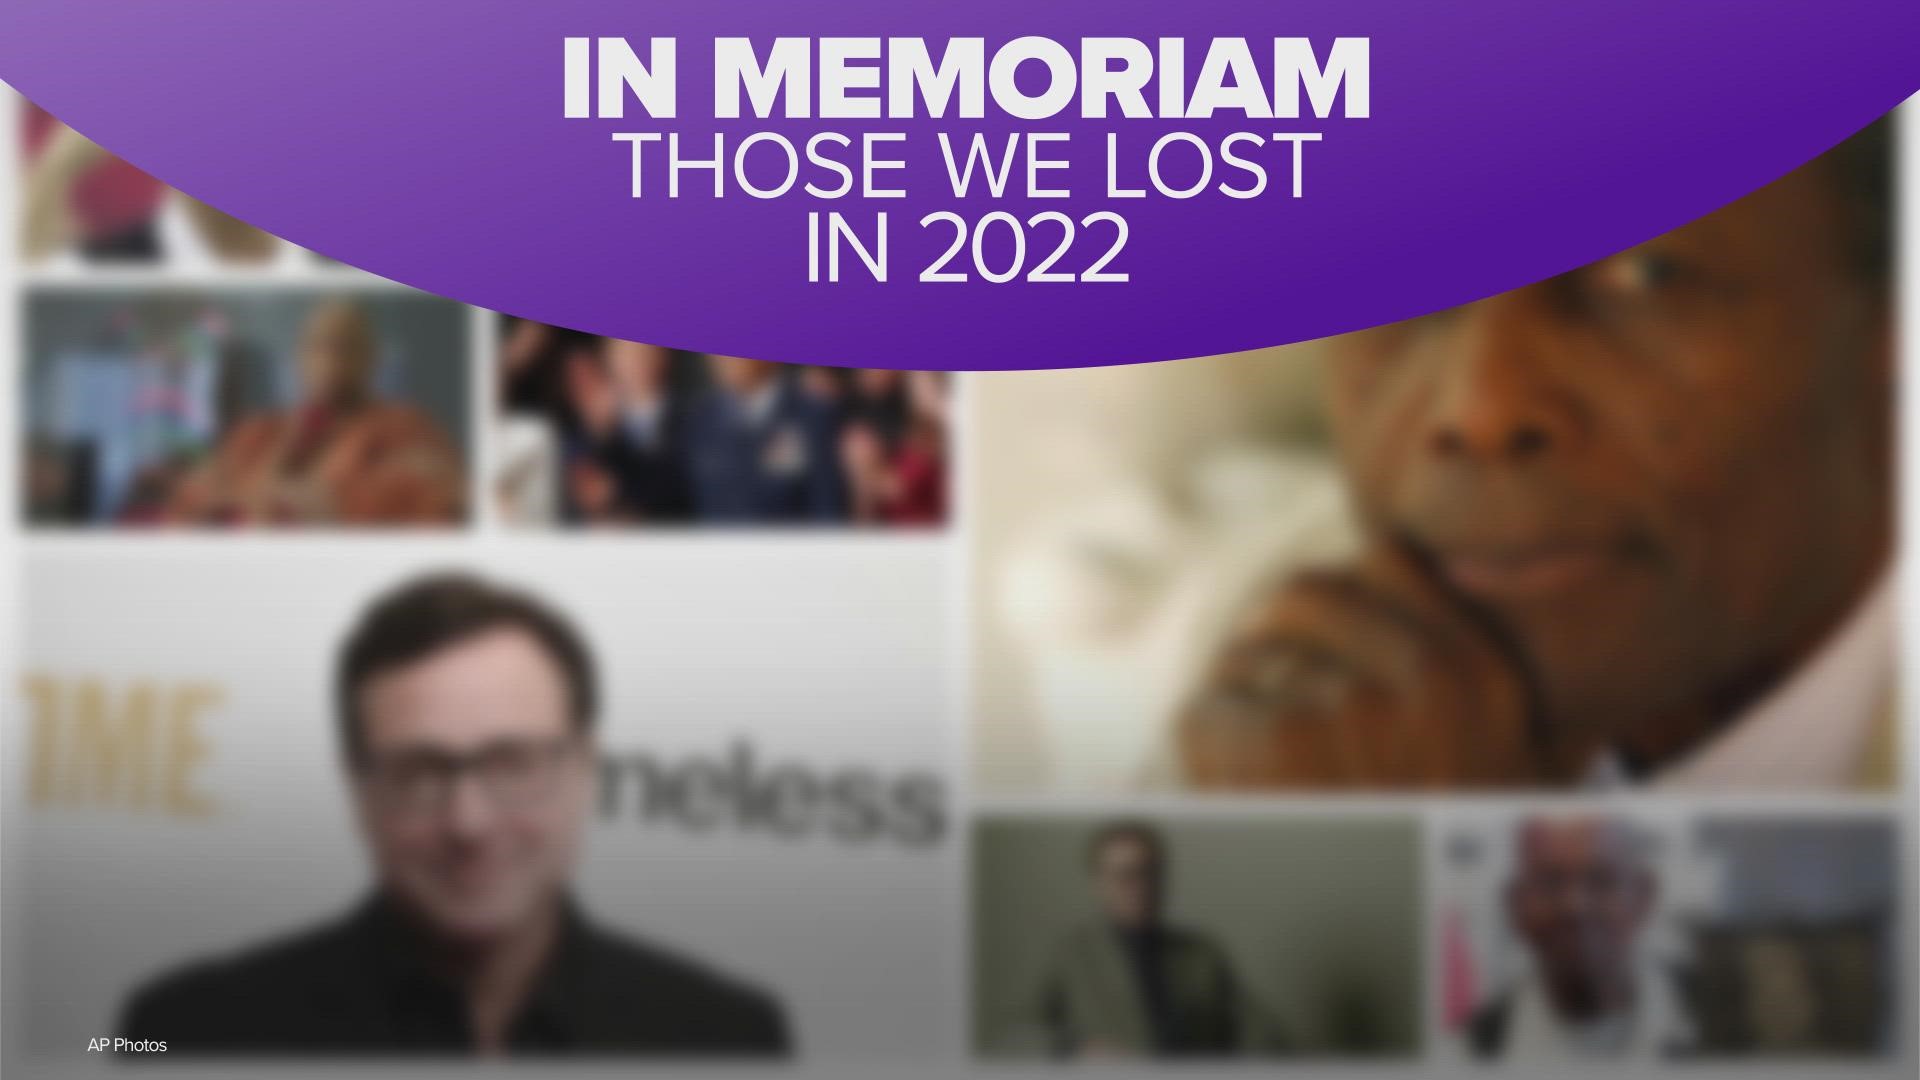 A trailbazing actor, a beloved TV dad, a rock and roll giant and three centenarians who served in World War II are some of the legends we lost in 2022.